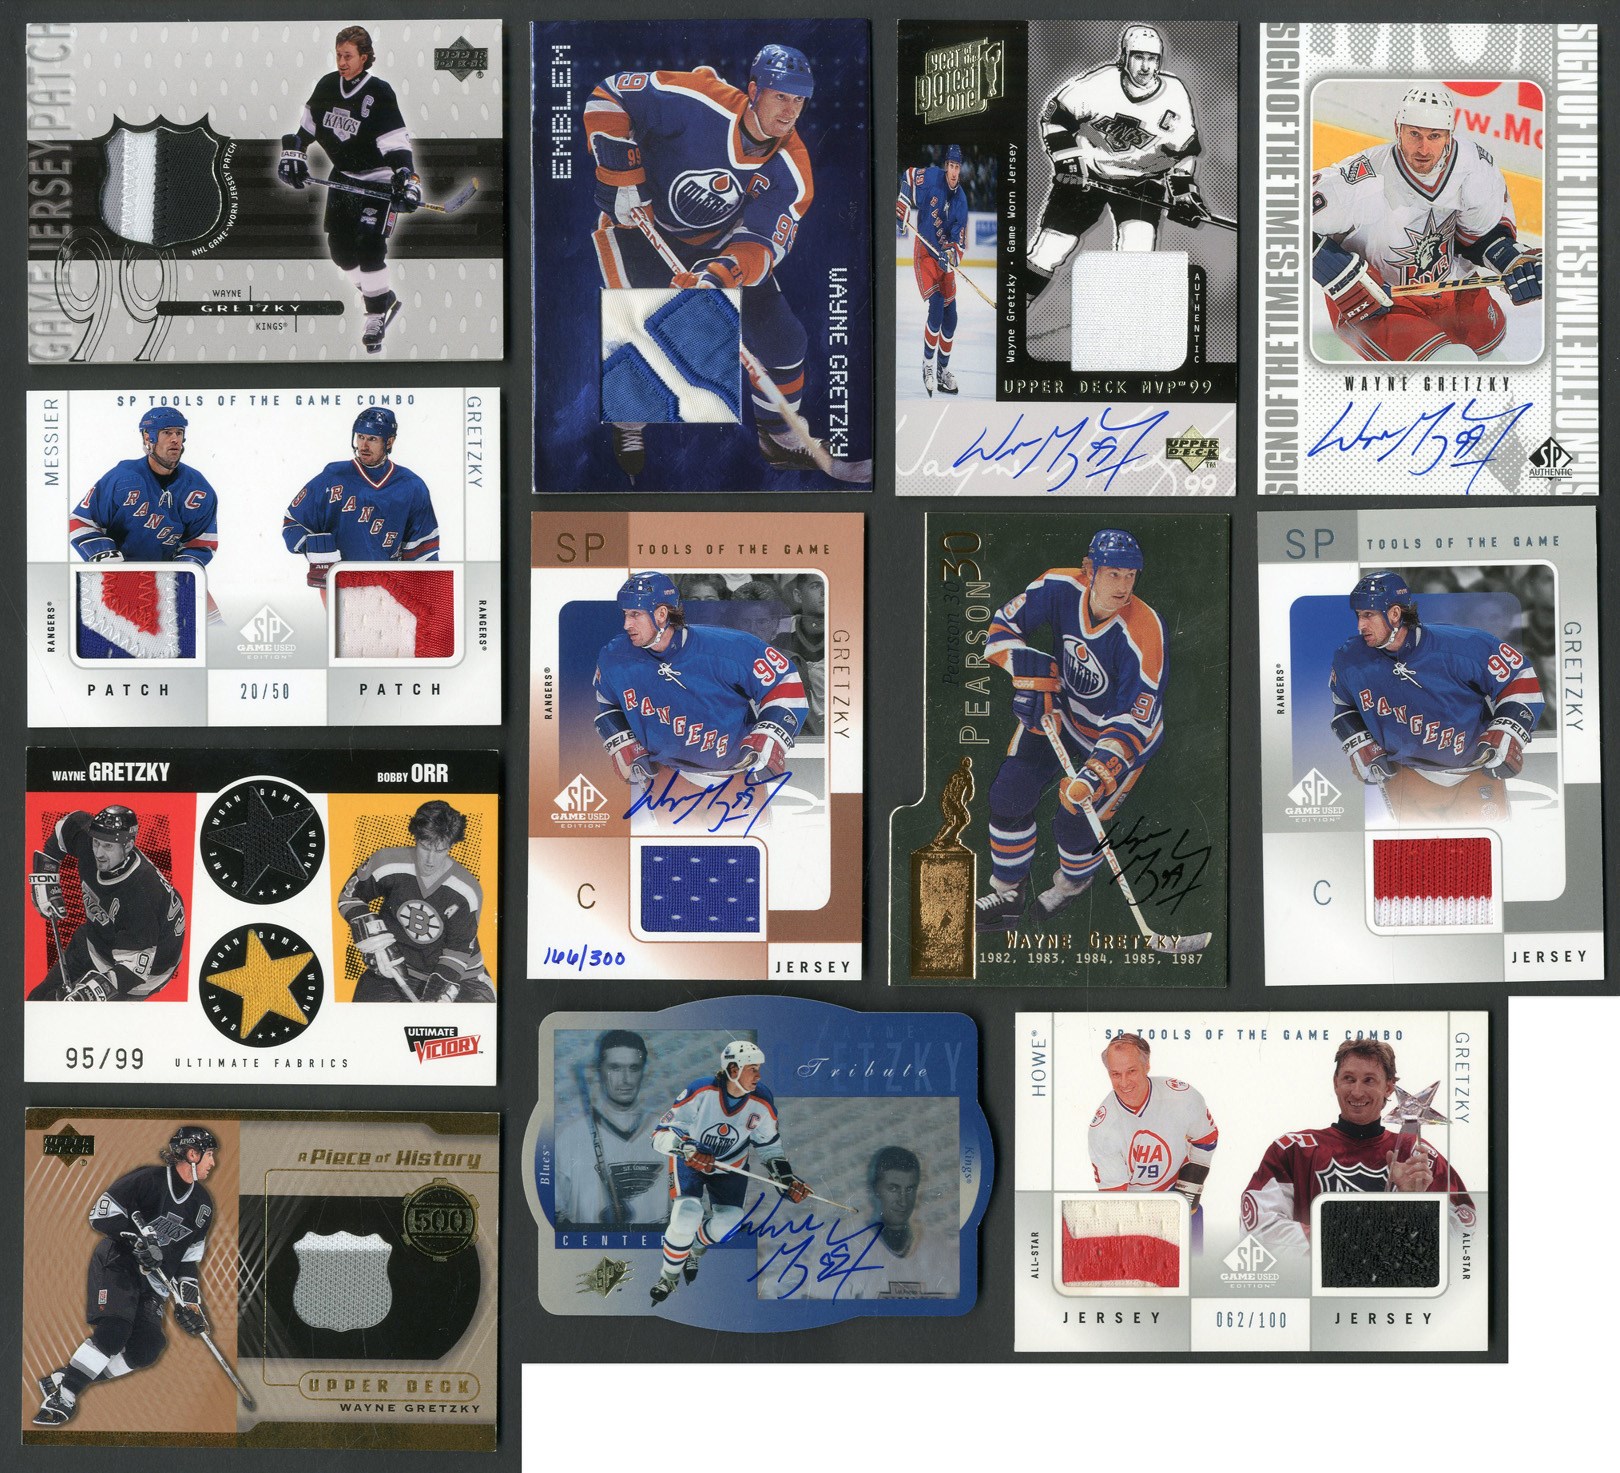 Baseball and Trading Cards - 1990s-2000s Wayne Gretzky Modern Insert Game Worn & Autograph Collection w/Rarities (30+)